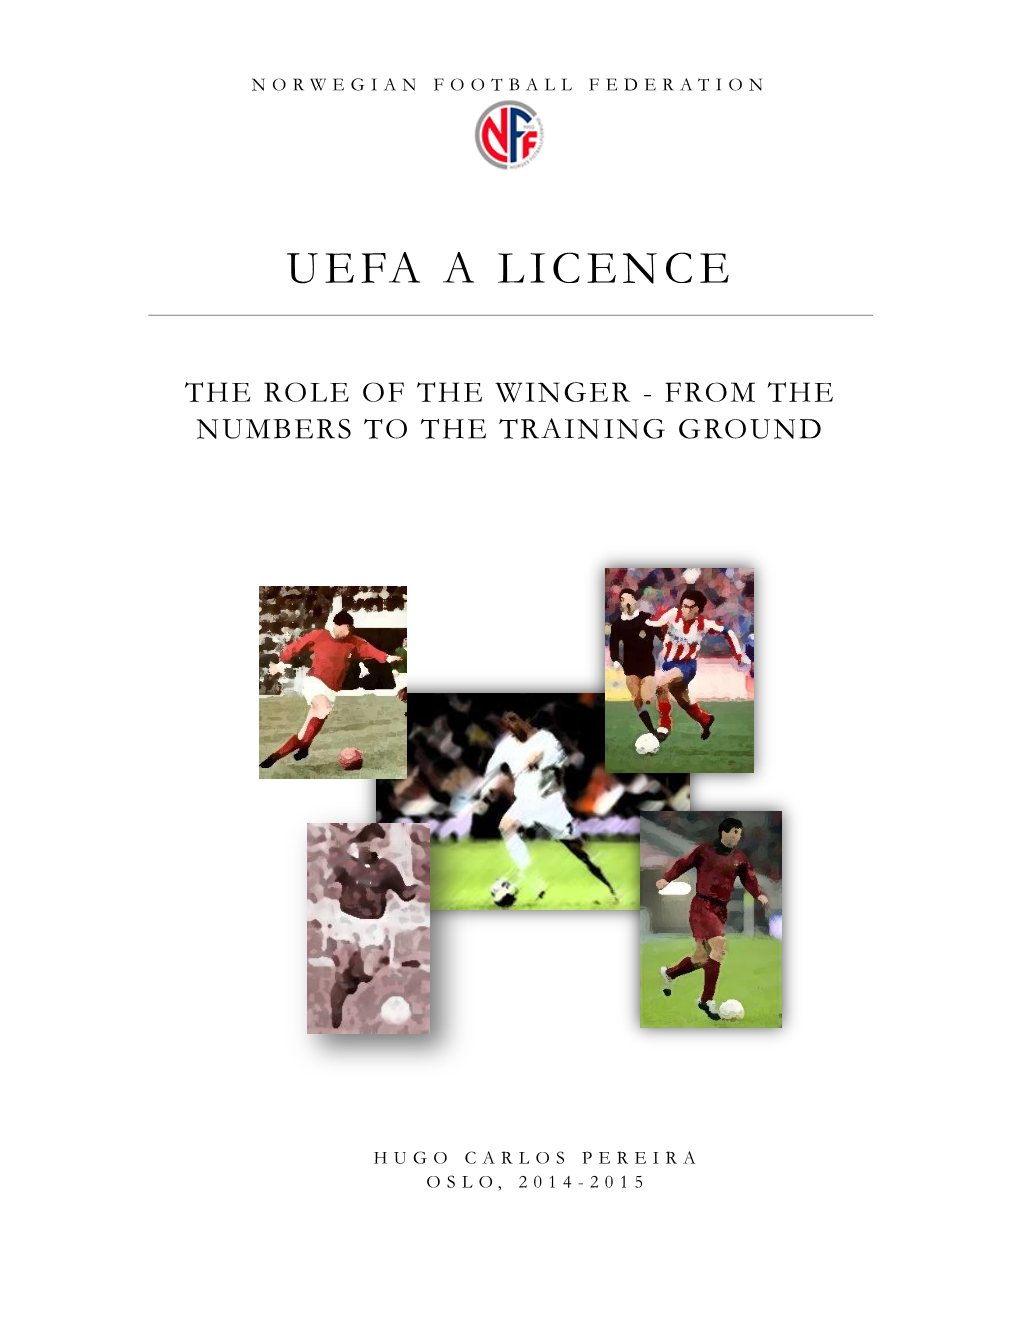 The Role of the Winger – from the Numbers to the Training Ground 2014-2015